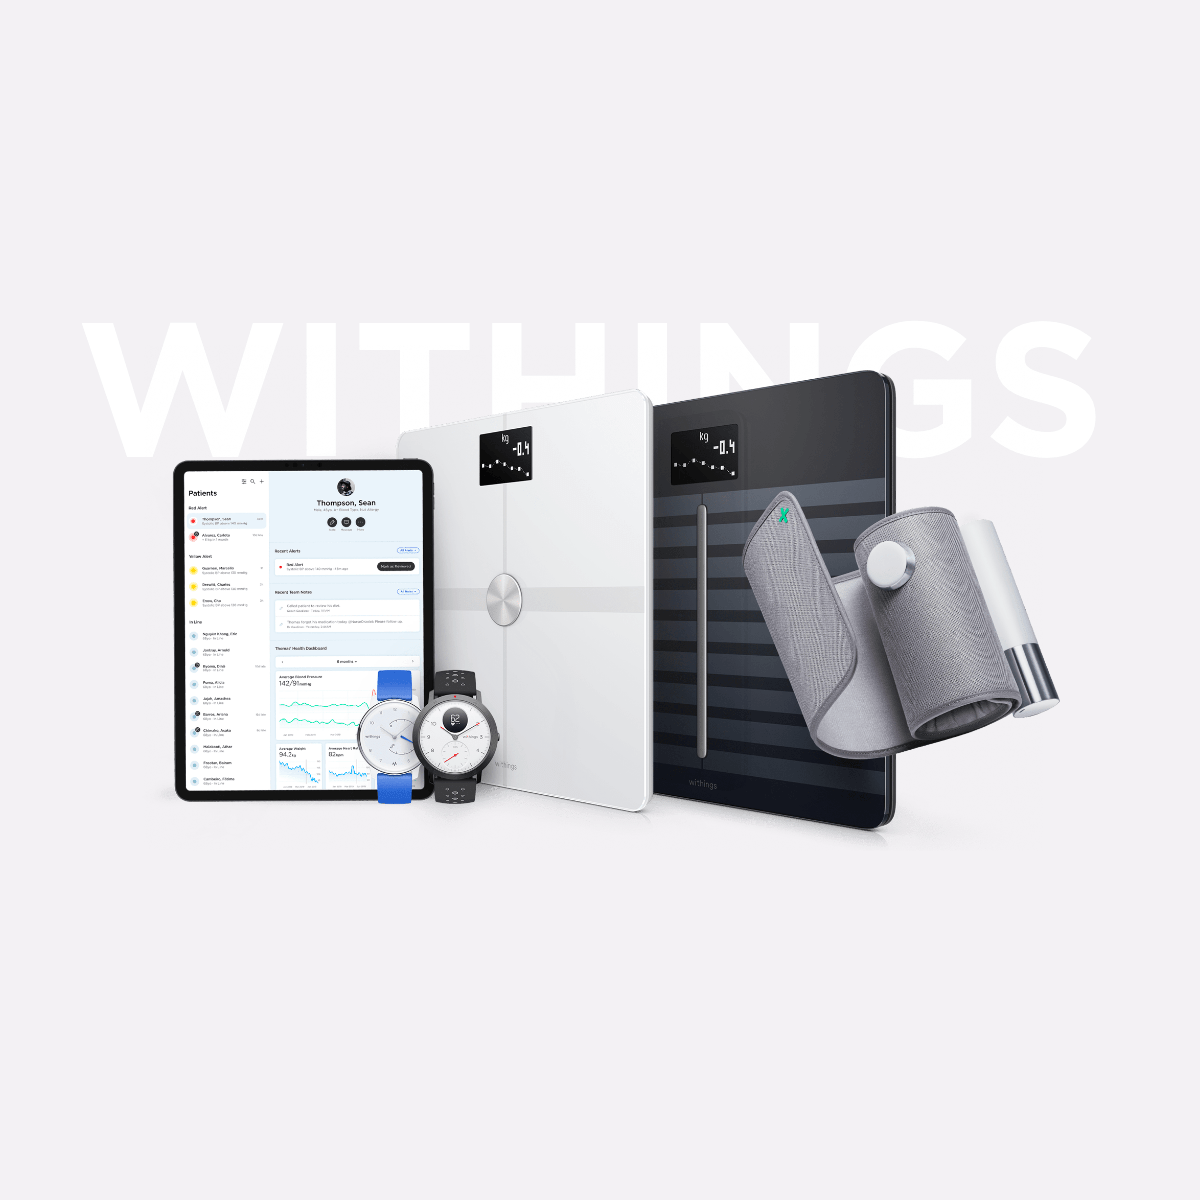 (c) Withings.com